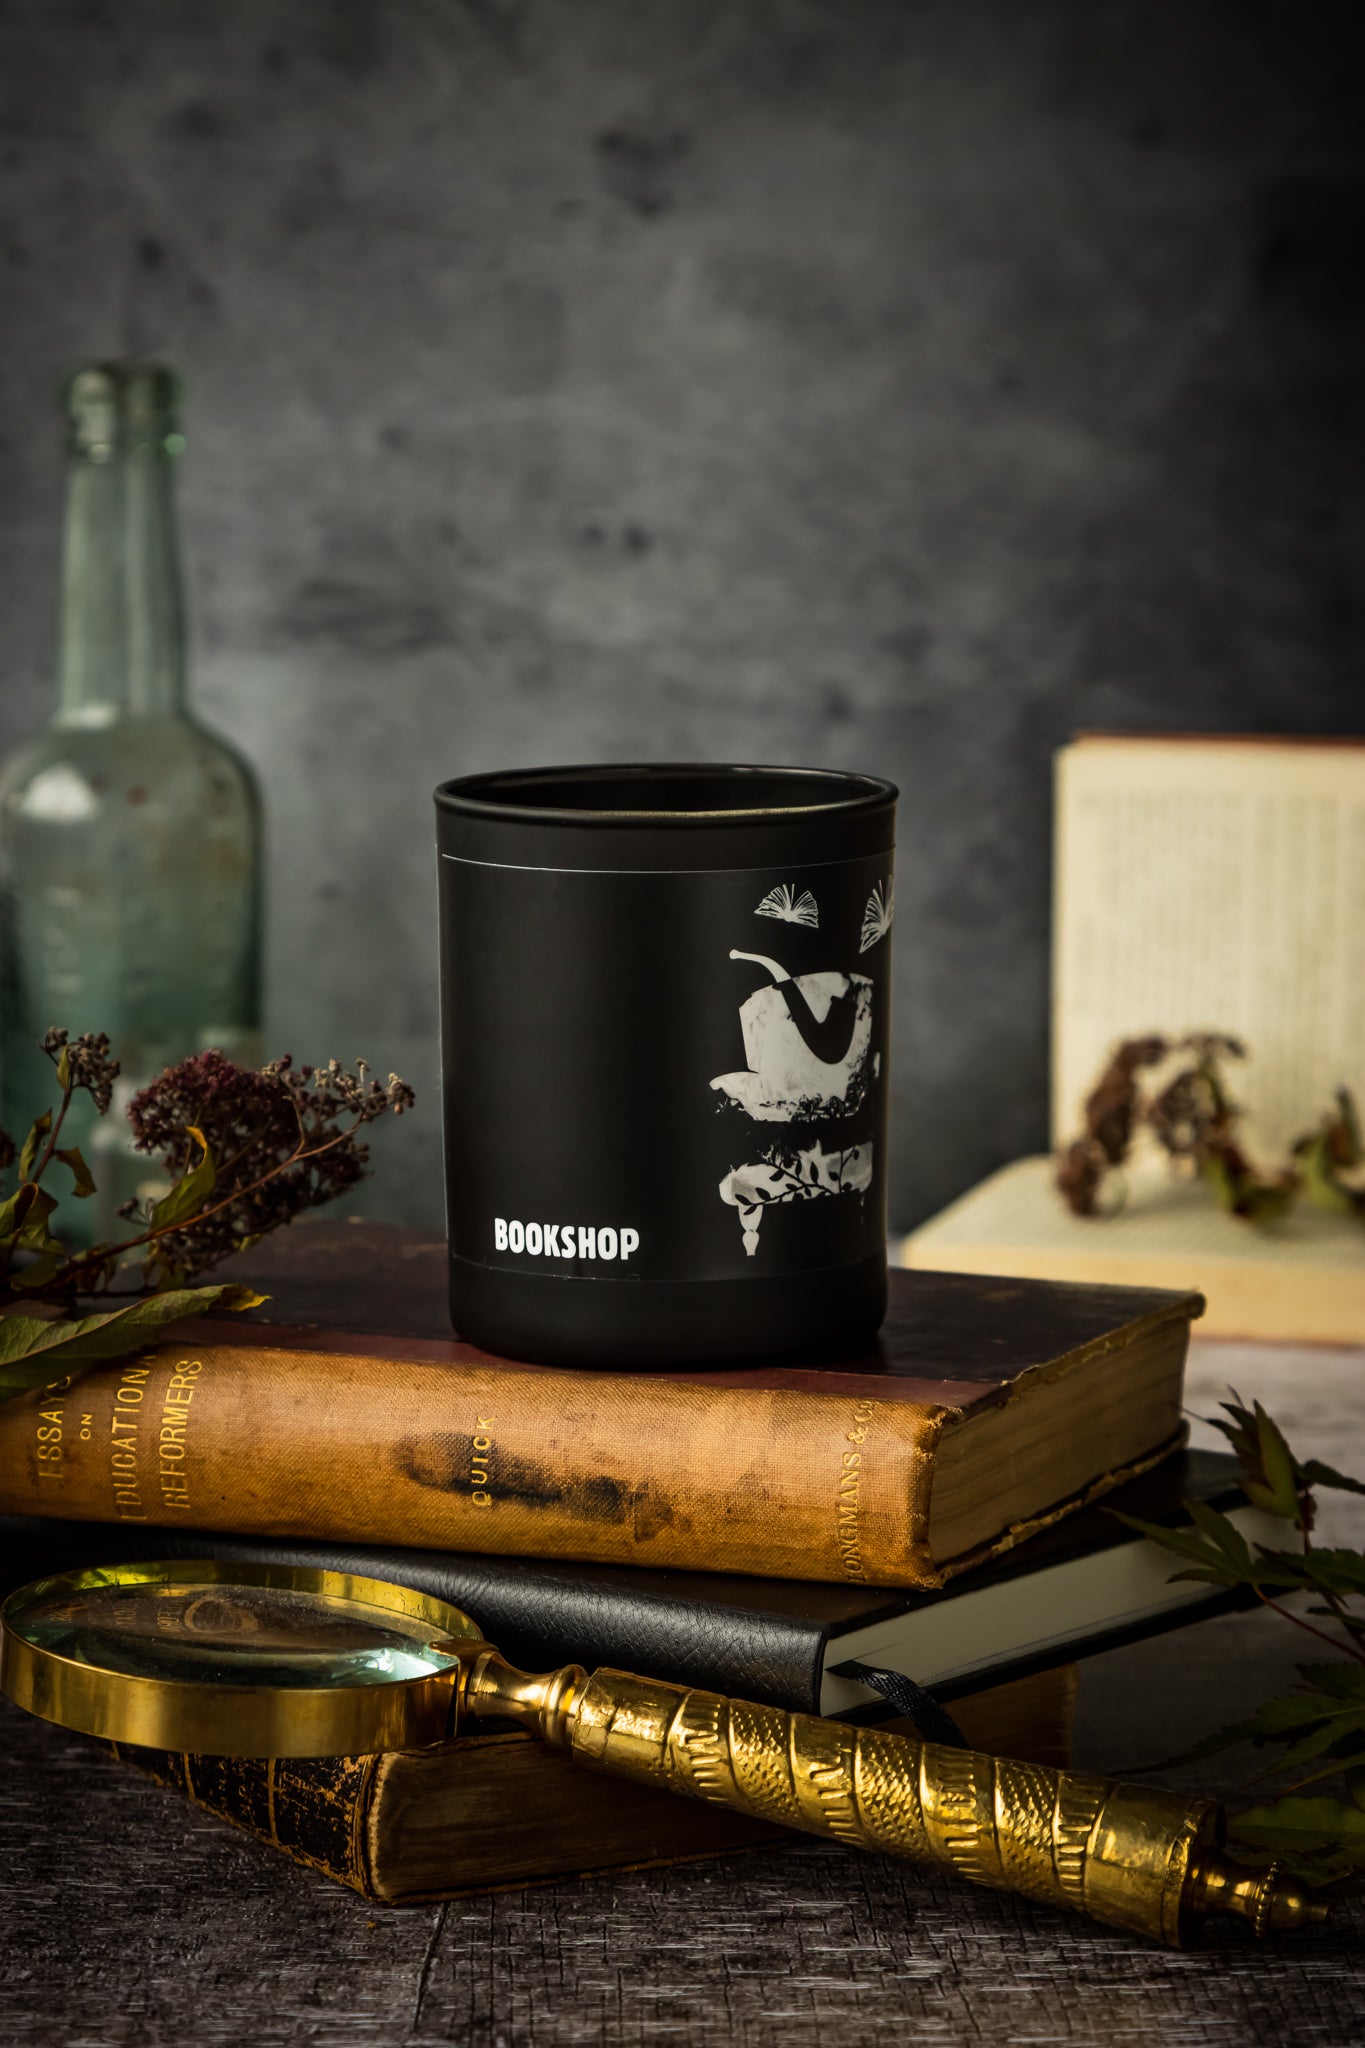 Bookshop scented candle in matte black glass jar stacked on top of old leather-bound books